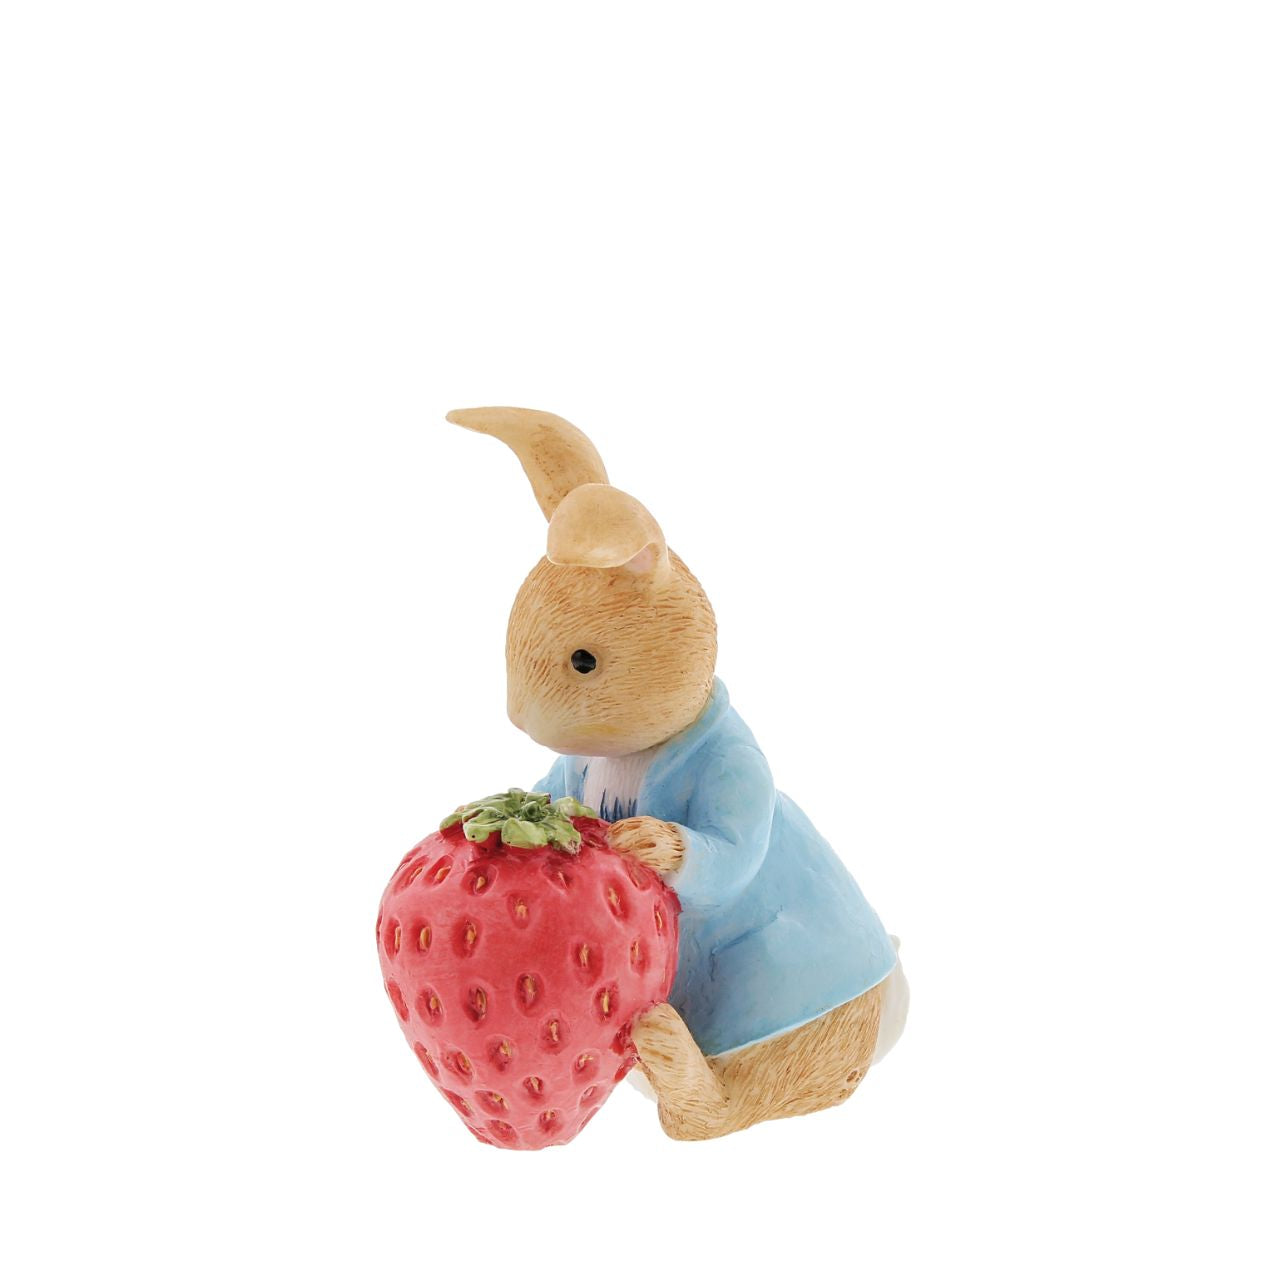 Beatrix Potter Peter Rabbit with Strawberry Figurine  Our mischievous and lovable bunny is ready to munch his way through this gigantic strawberry. This unique pose makes a treasured keepsake or gift for a Peter Rabbit lover. Created from newly drawn artworks helping to bring the featured character to life.